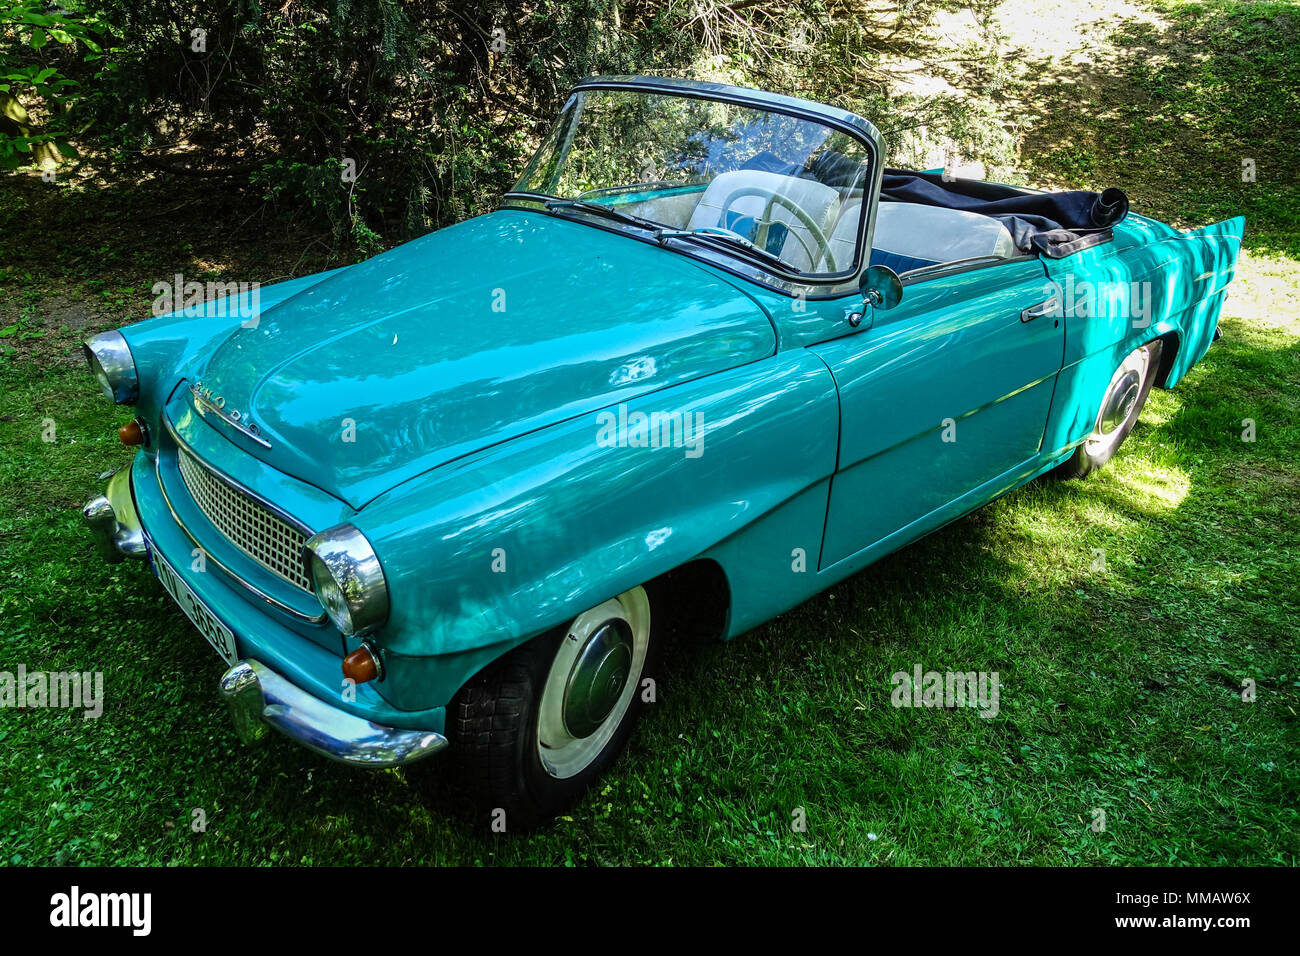 Skoda Felicia High Resolution Stock Photography and Images - Alamy